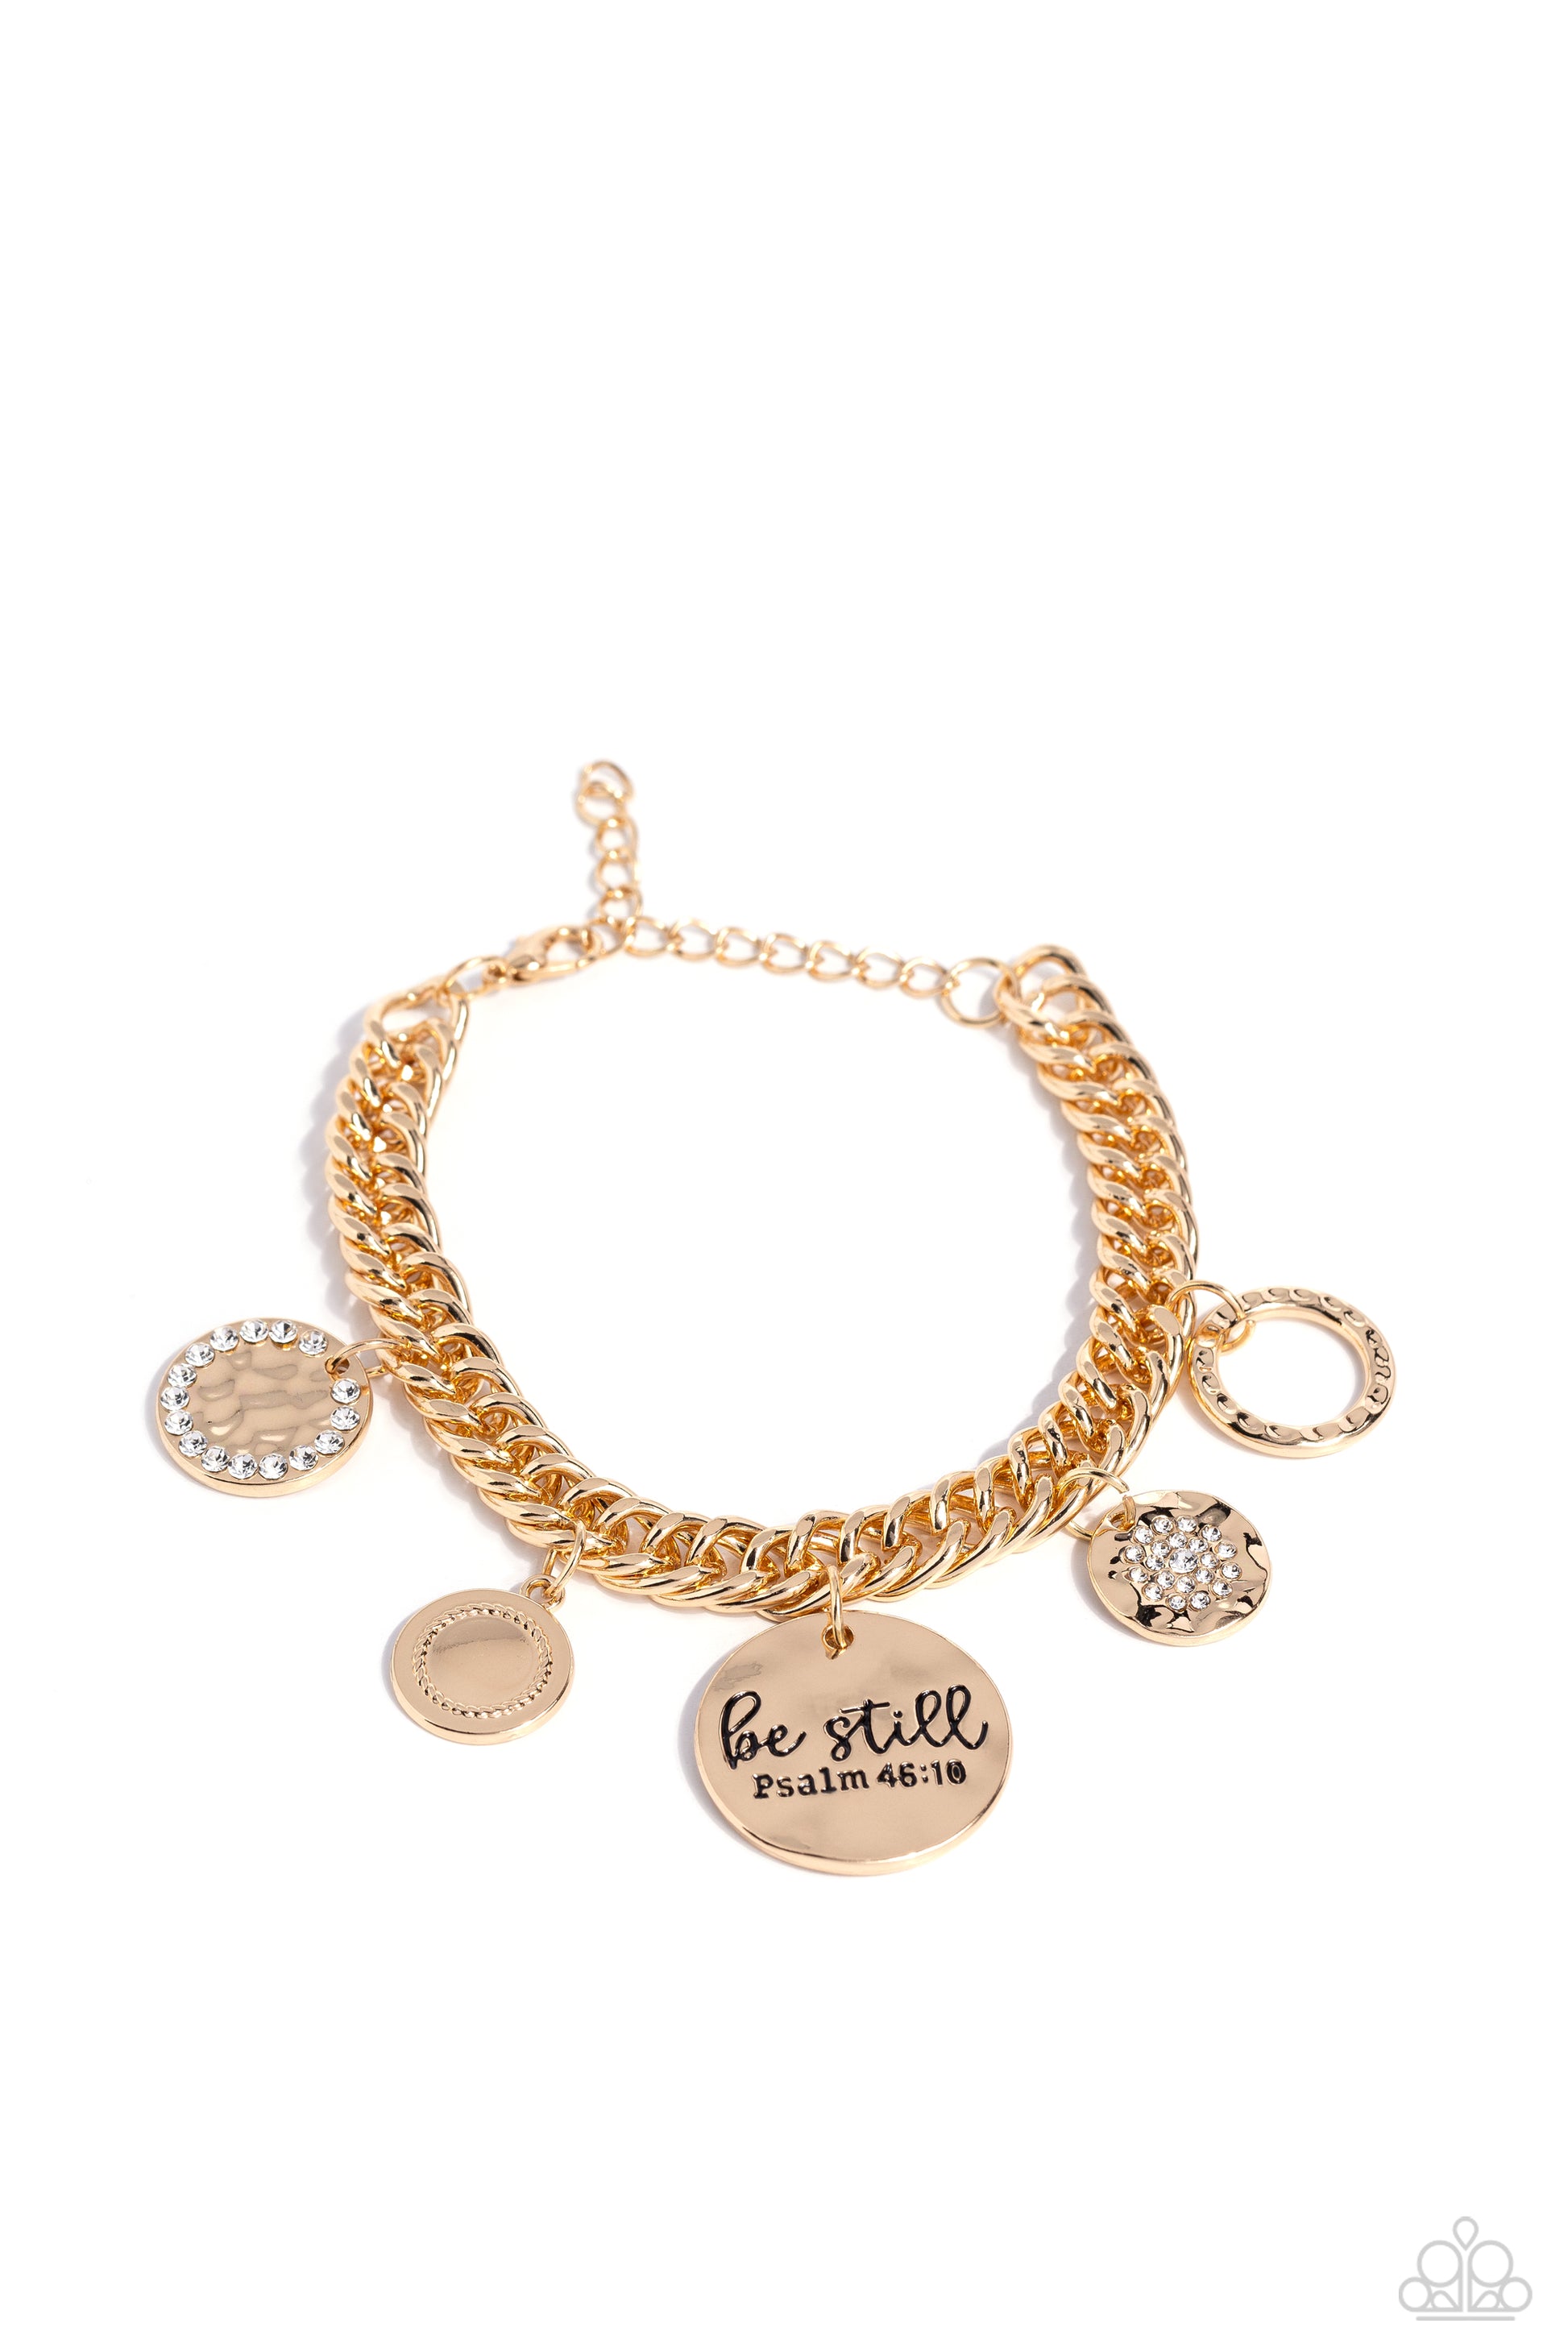 Paparazzi Accessories - Glitter and Grace - Gold Inspirational Braceleadgliding from a thick gold curb chain, a collection of refined charms adds some texture and shimmer to this monochromatic mash-up. An oversized, hammered disc is stamped with the phrase "be still" with the scripture reference "Psalm 46:10" listed underneath it. A smaller, hammered disc with a sprinkle of white rhinestones in its center and a gold disc featuring a scalloped ring in its center glide next to the oversized gold disc